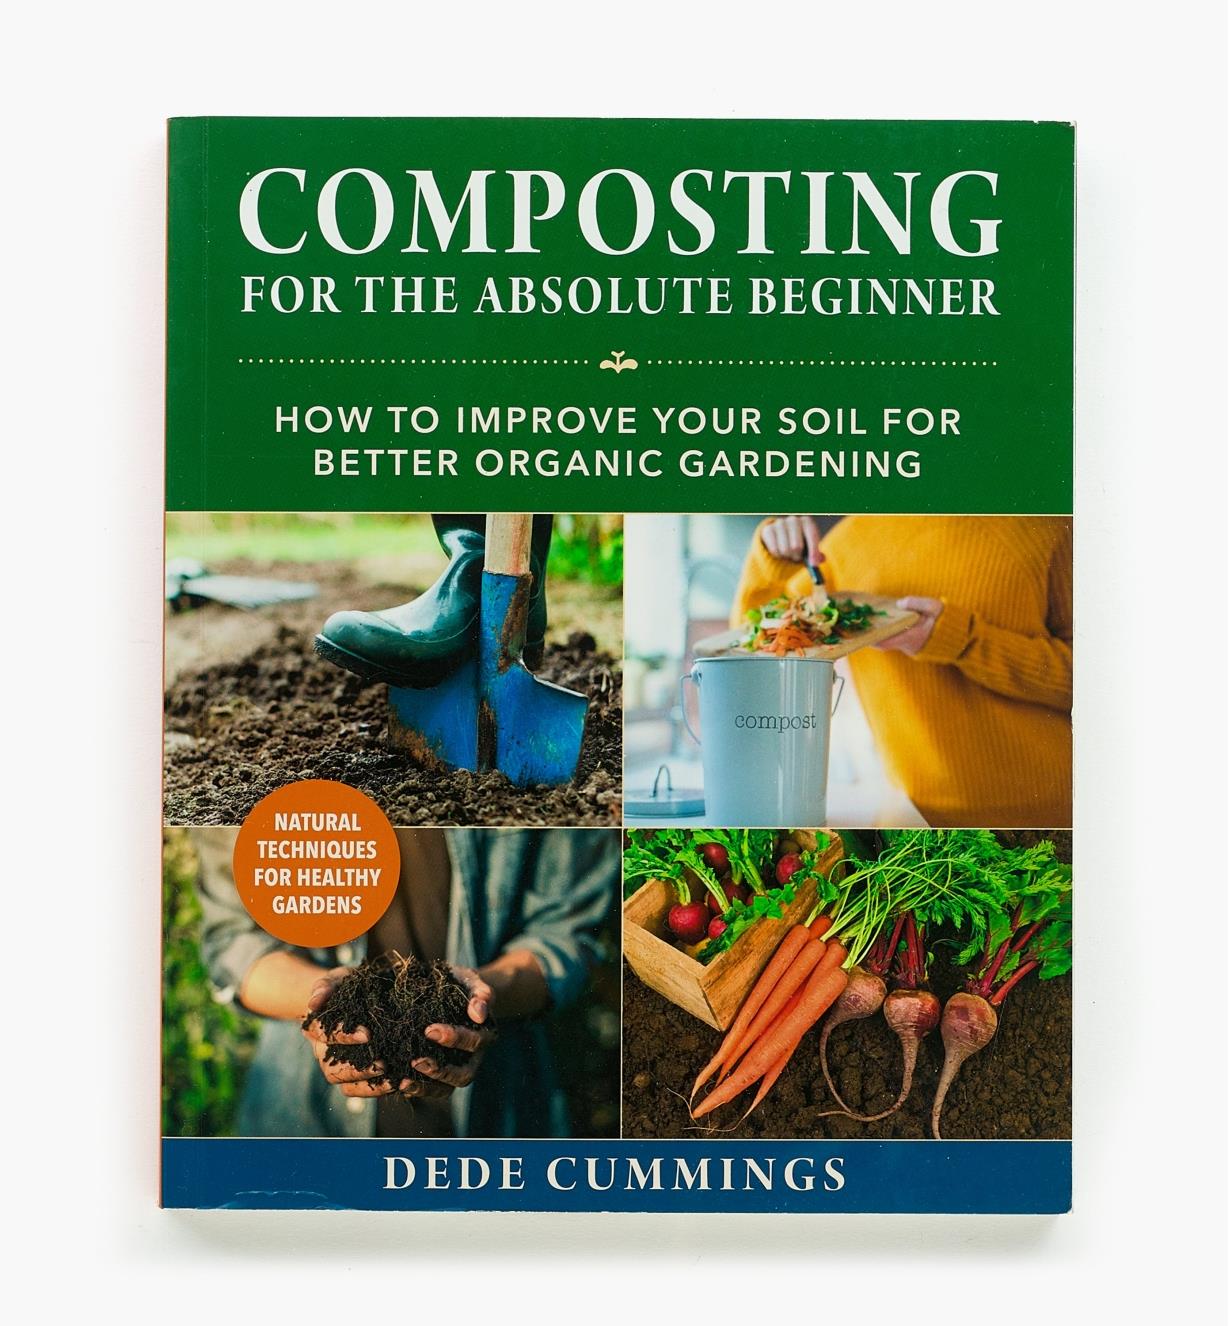 LA661 - Composting for the Absolute Beginner